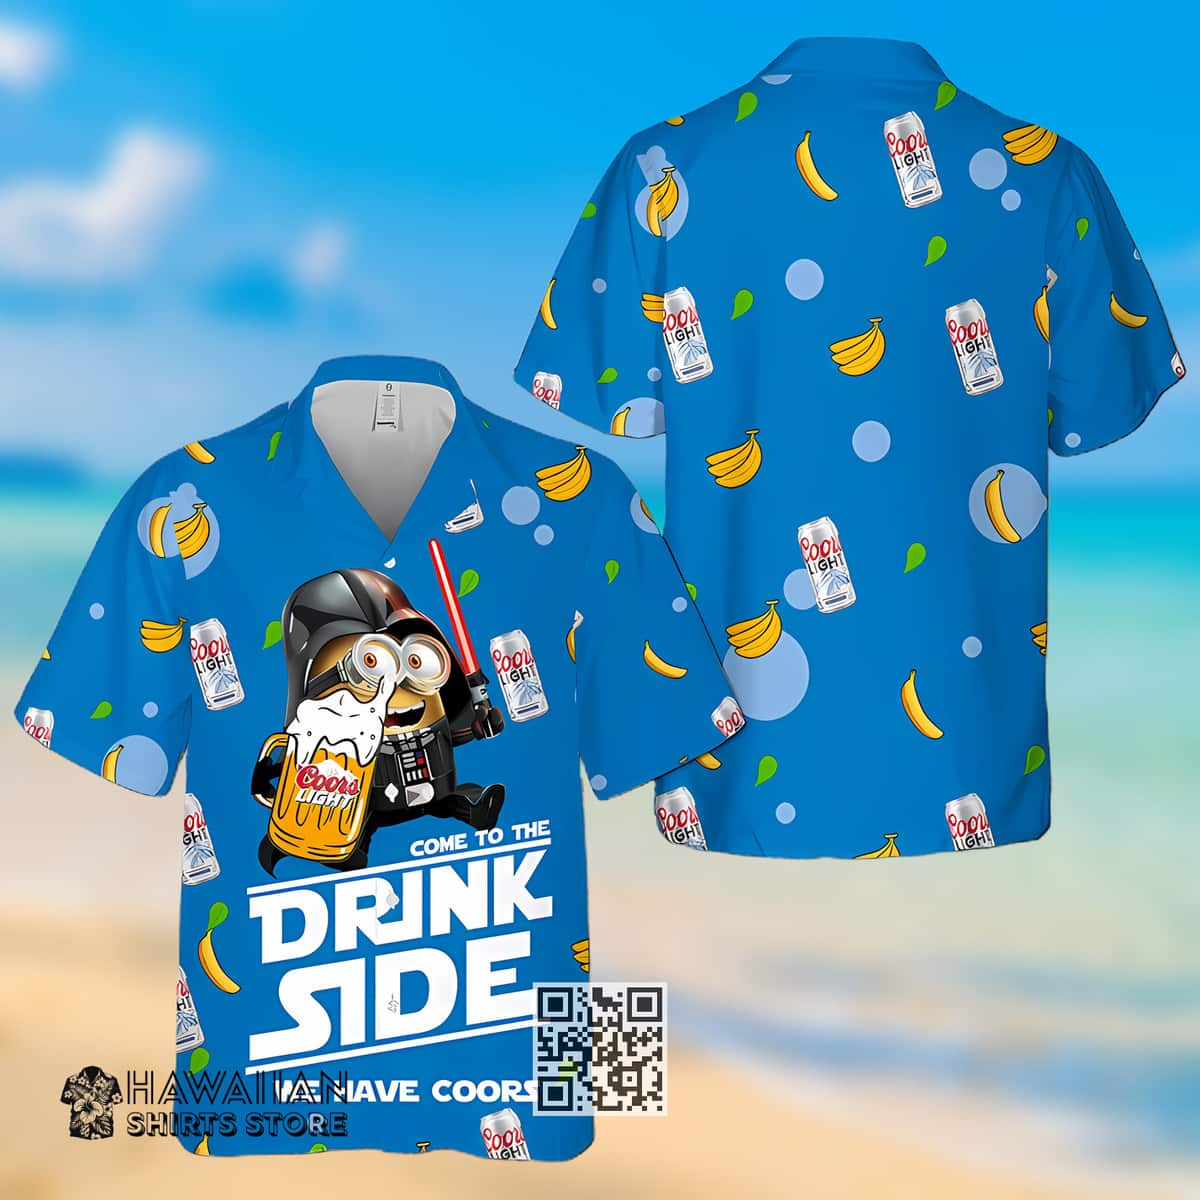 Coors Light Hawaiian Shirt Minions Darth Vader Come To The Drink Side We Have Coors